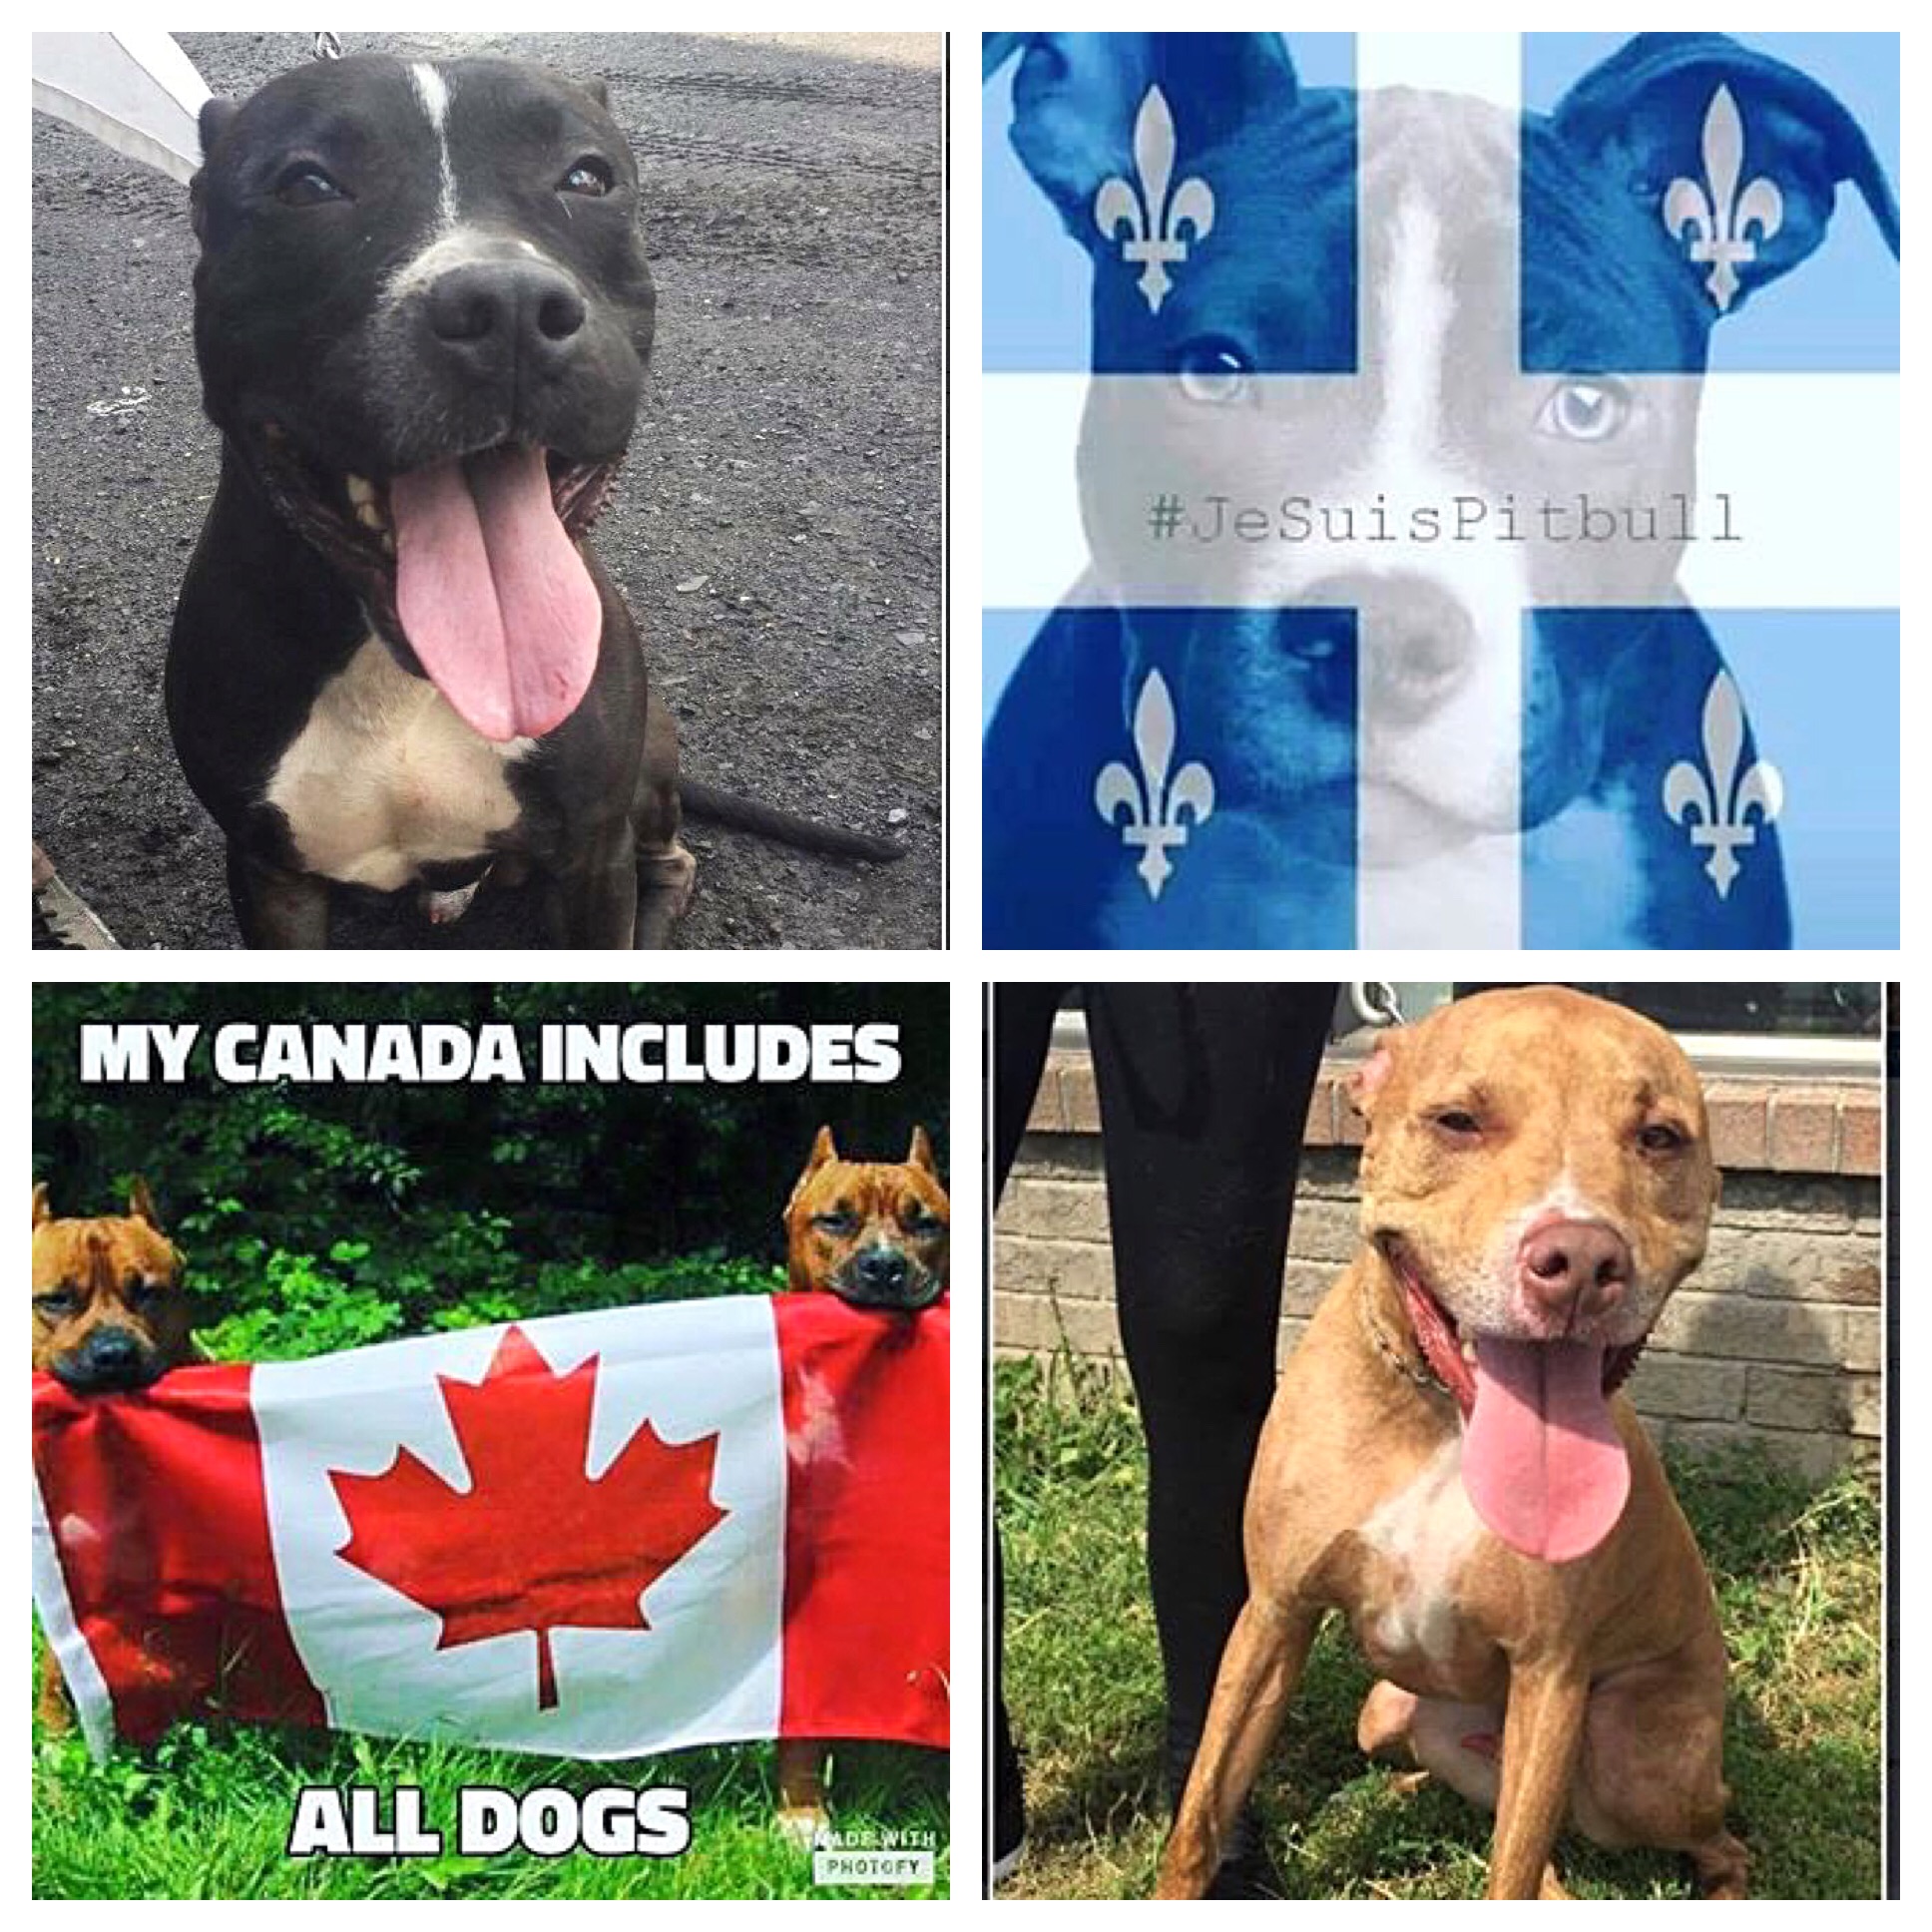 2017 Montreal End BSL Advocacy and Rescue Mission